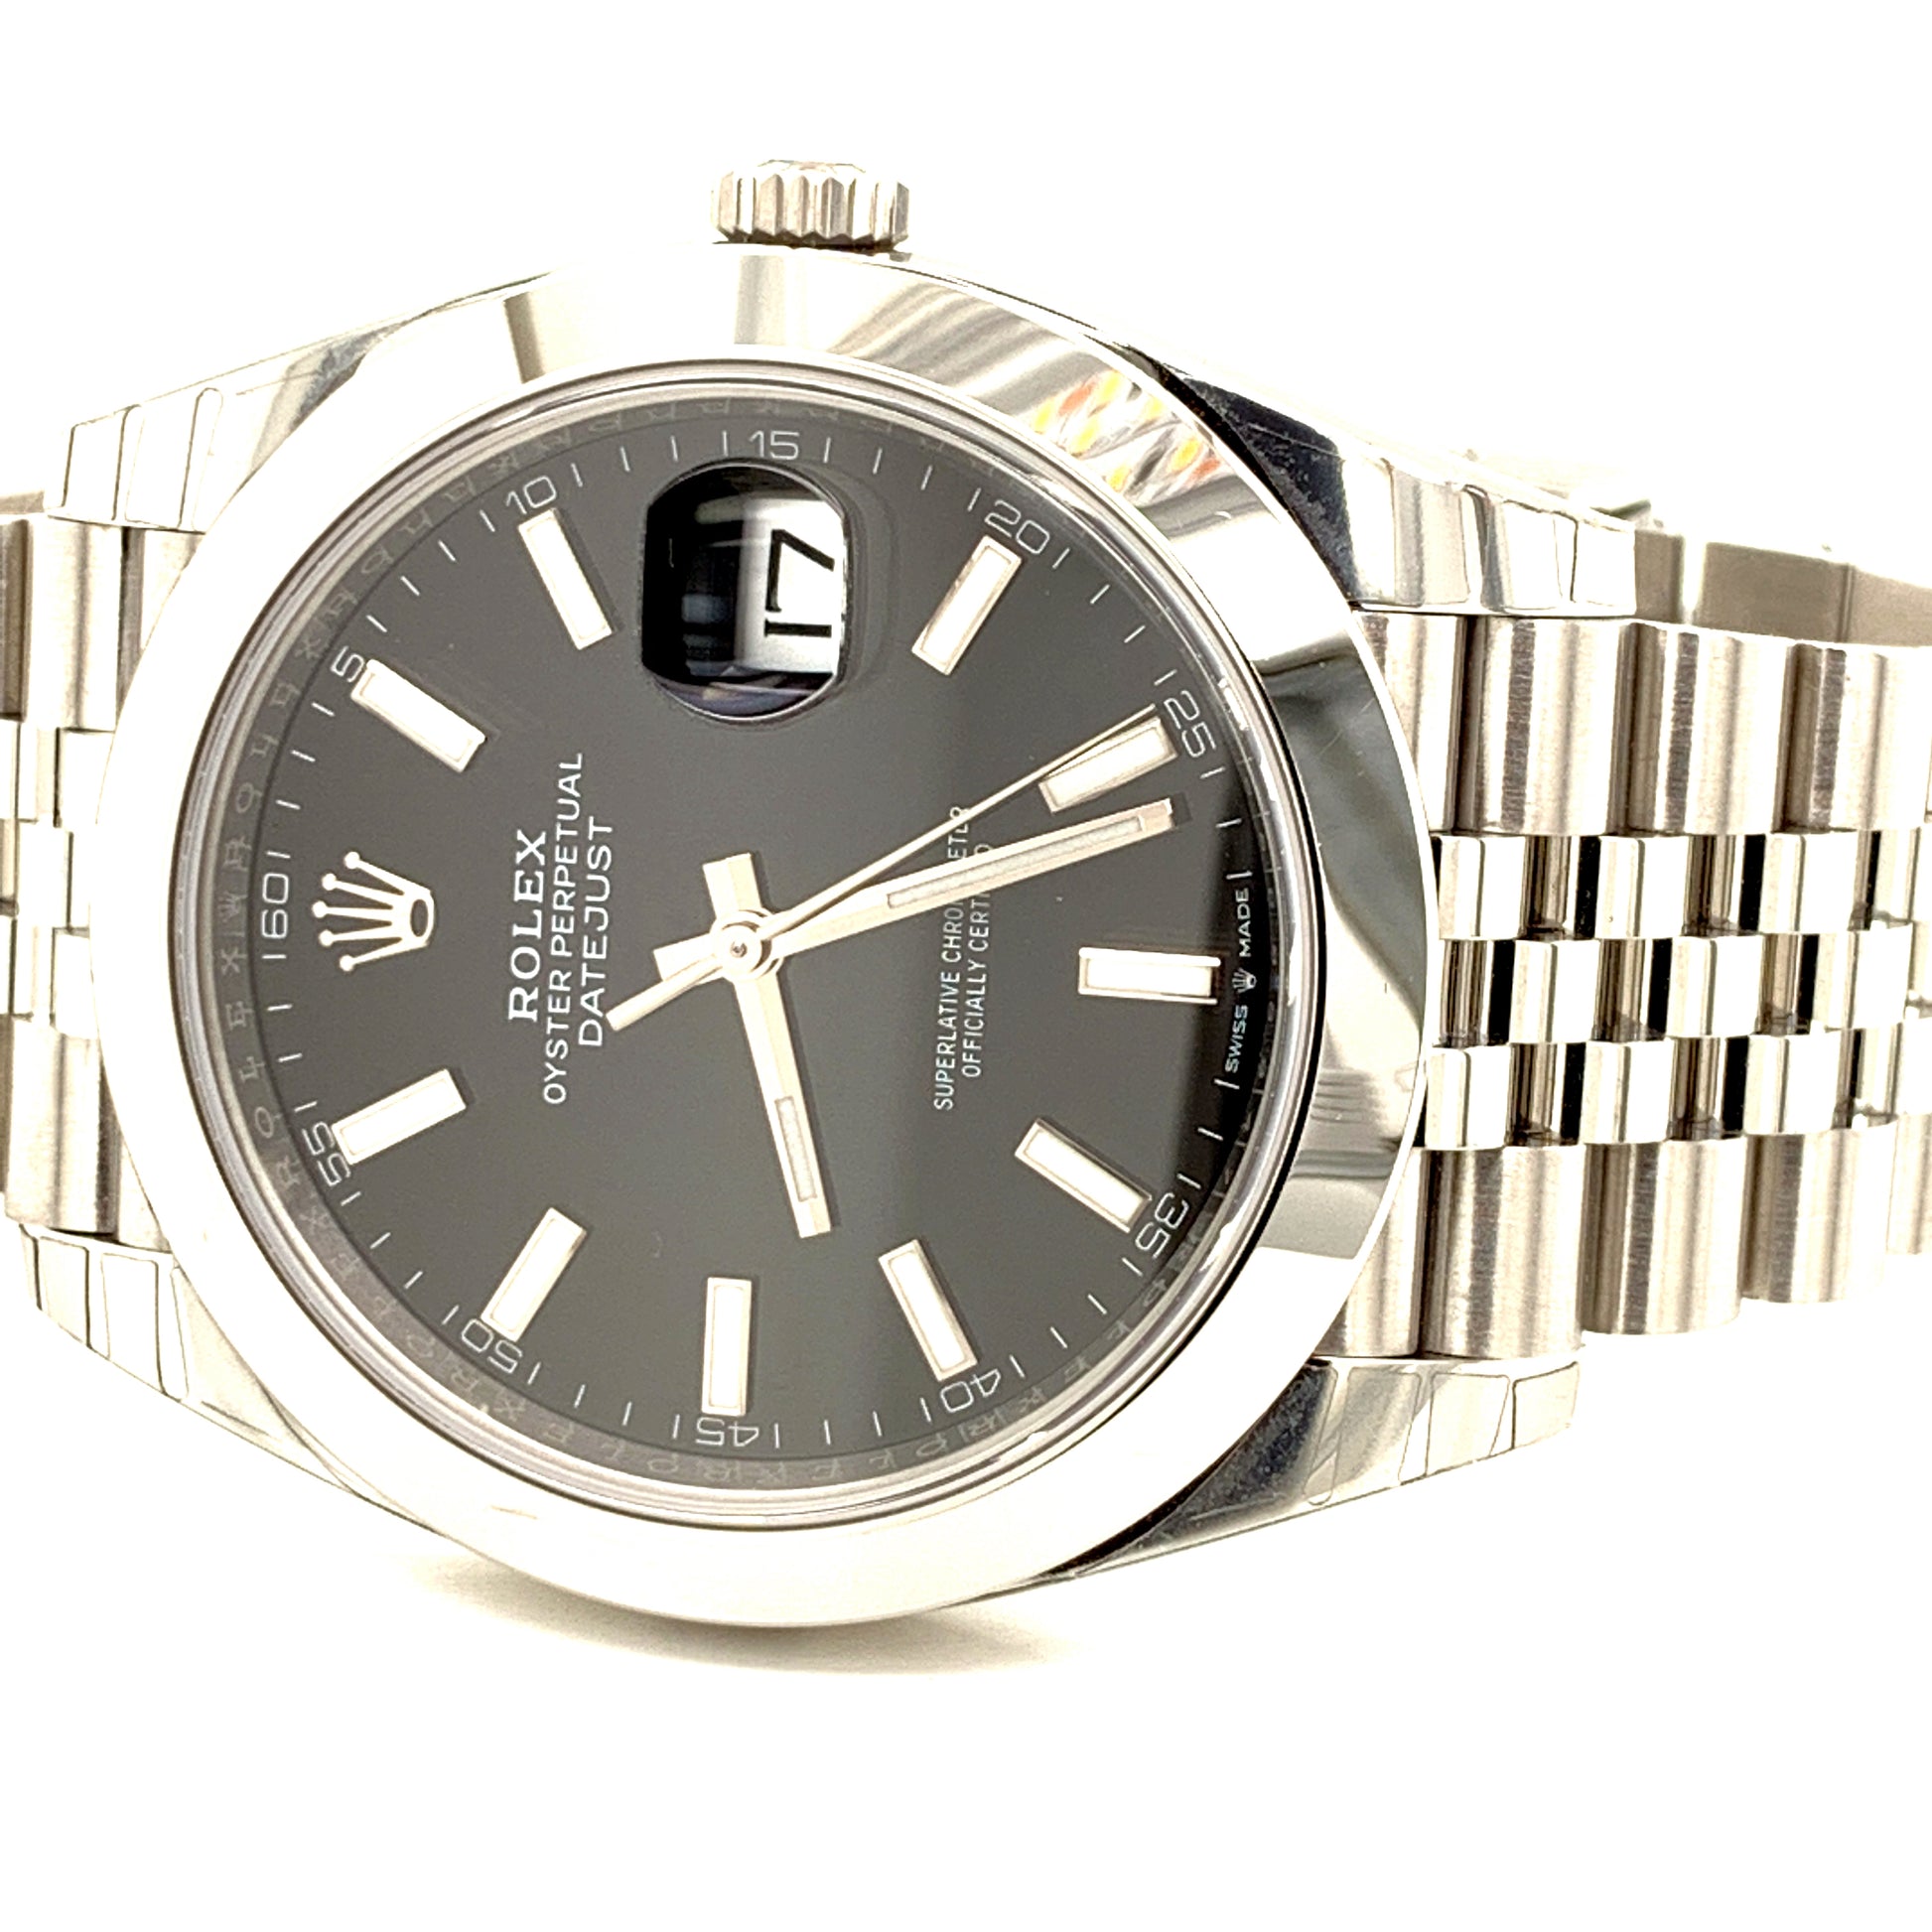 Rolex Oyster Perpetual Datejust 41